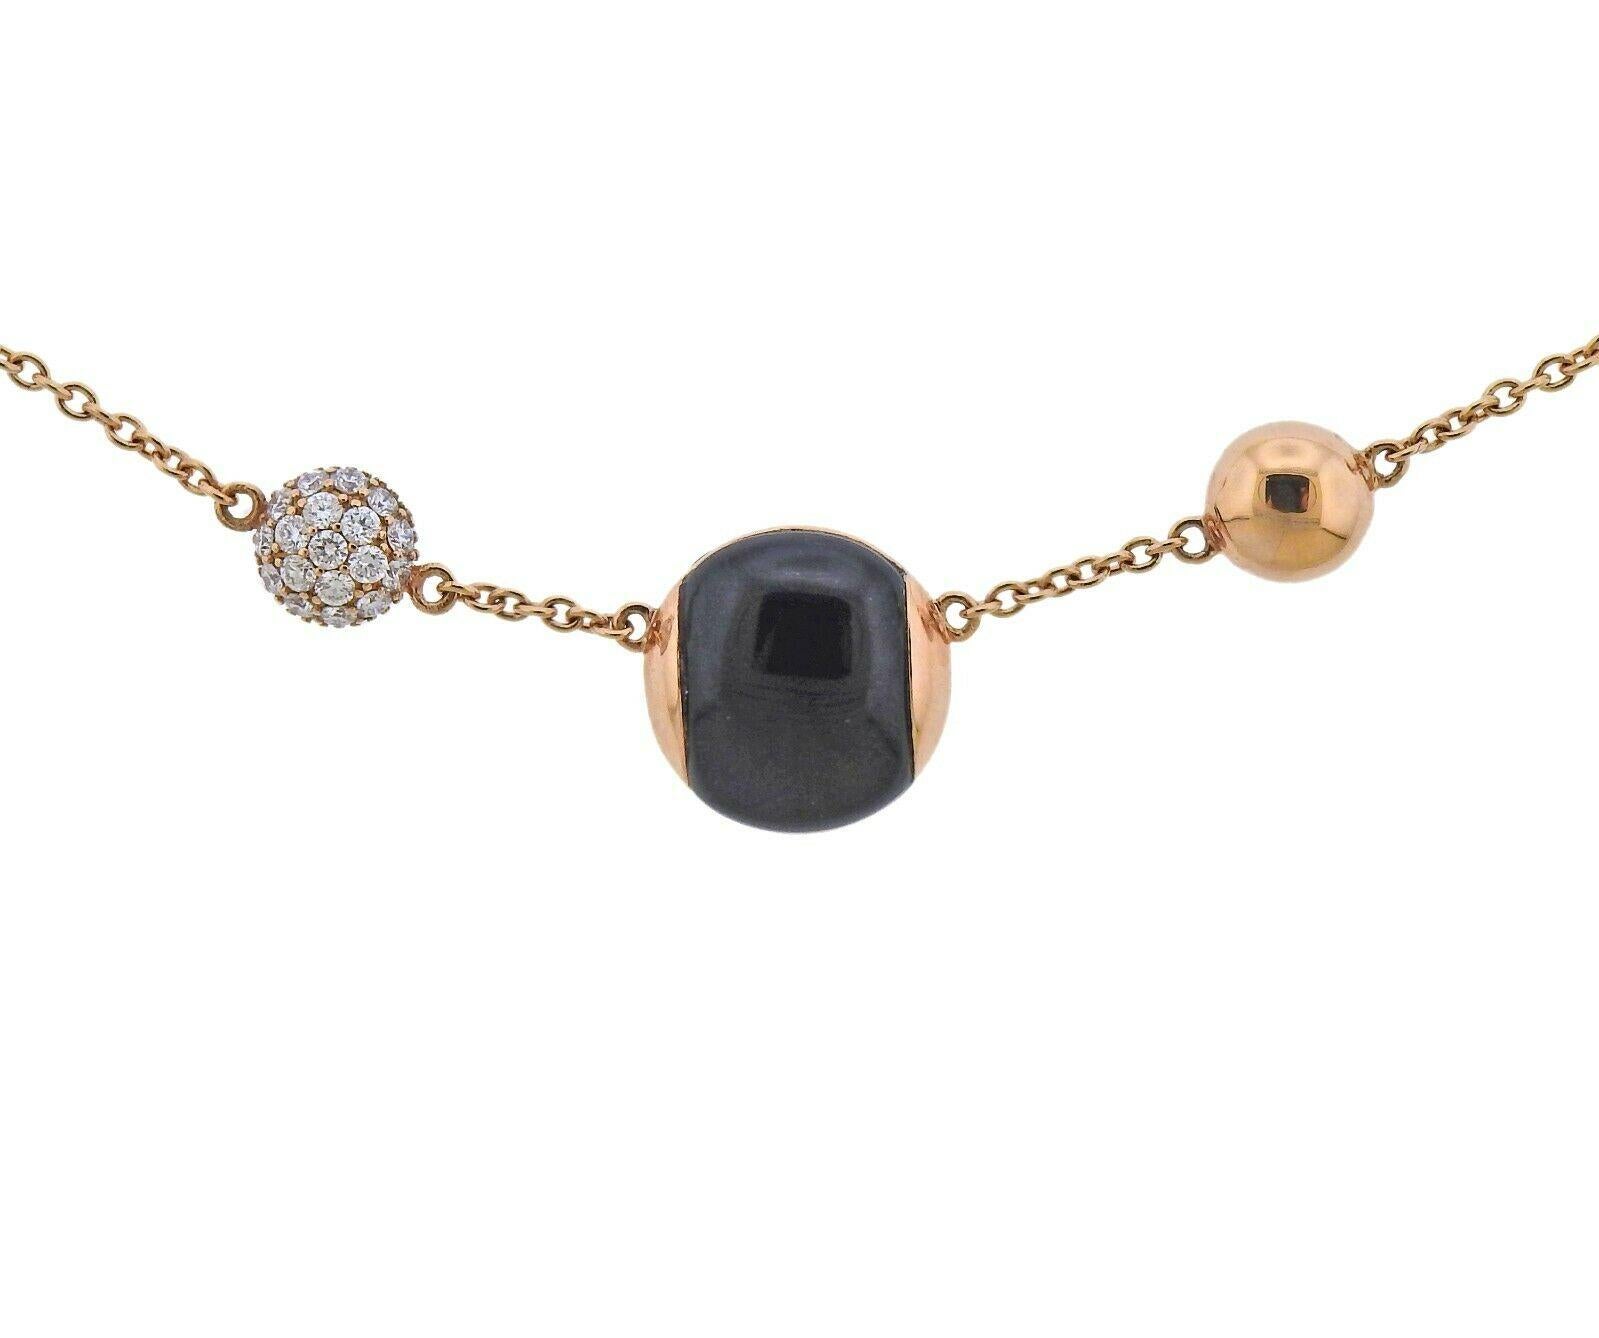 New 18k rose gold necklace by Roberto Coin, with black jade and approx. 0.22ctw in G/VS diamonds. Necklace is 18